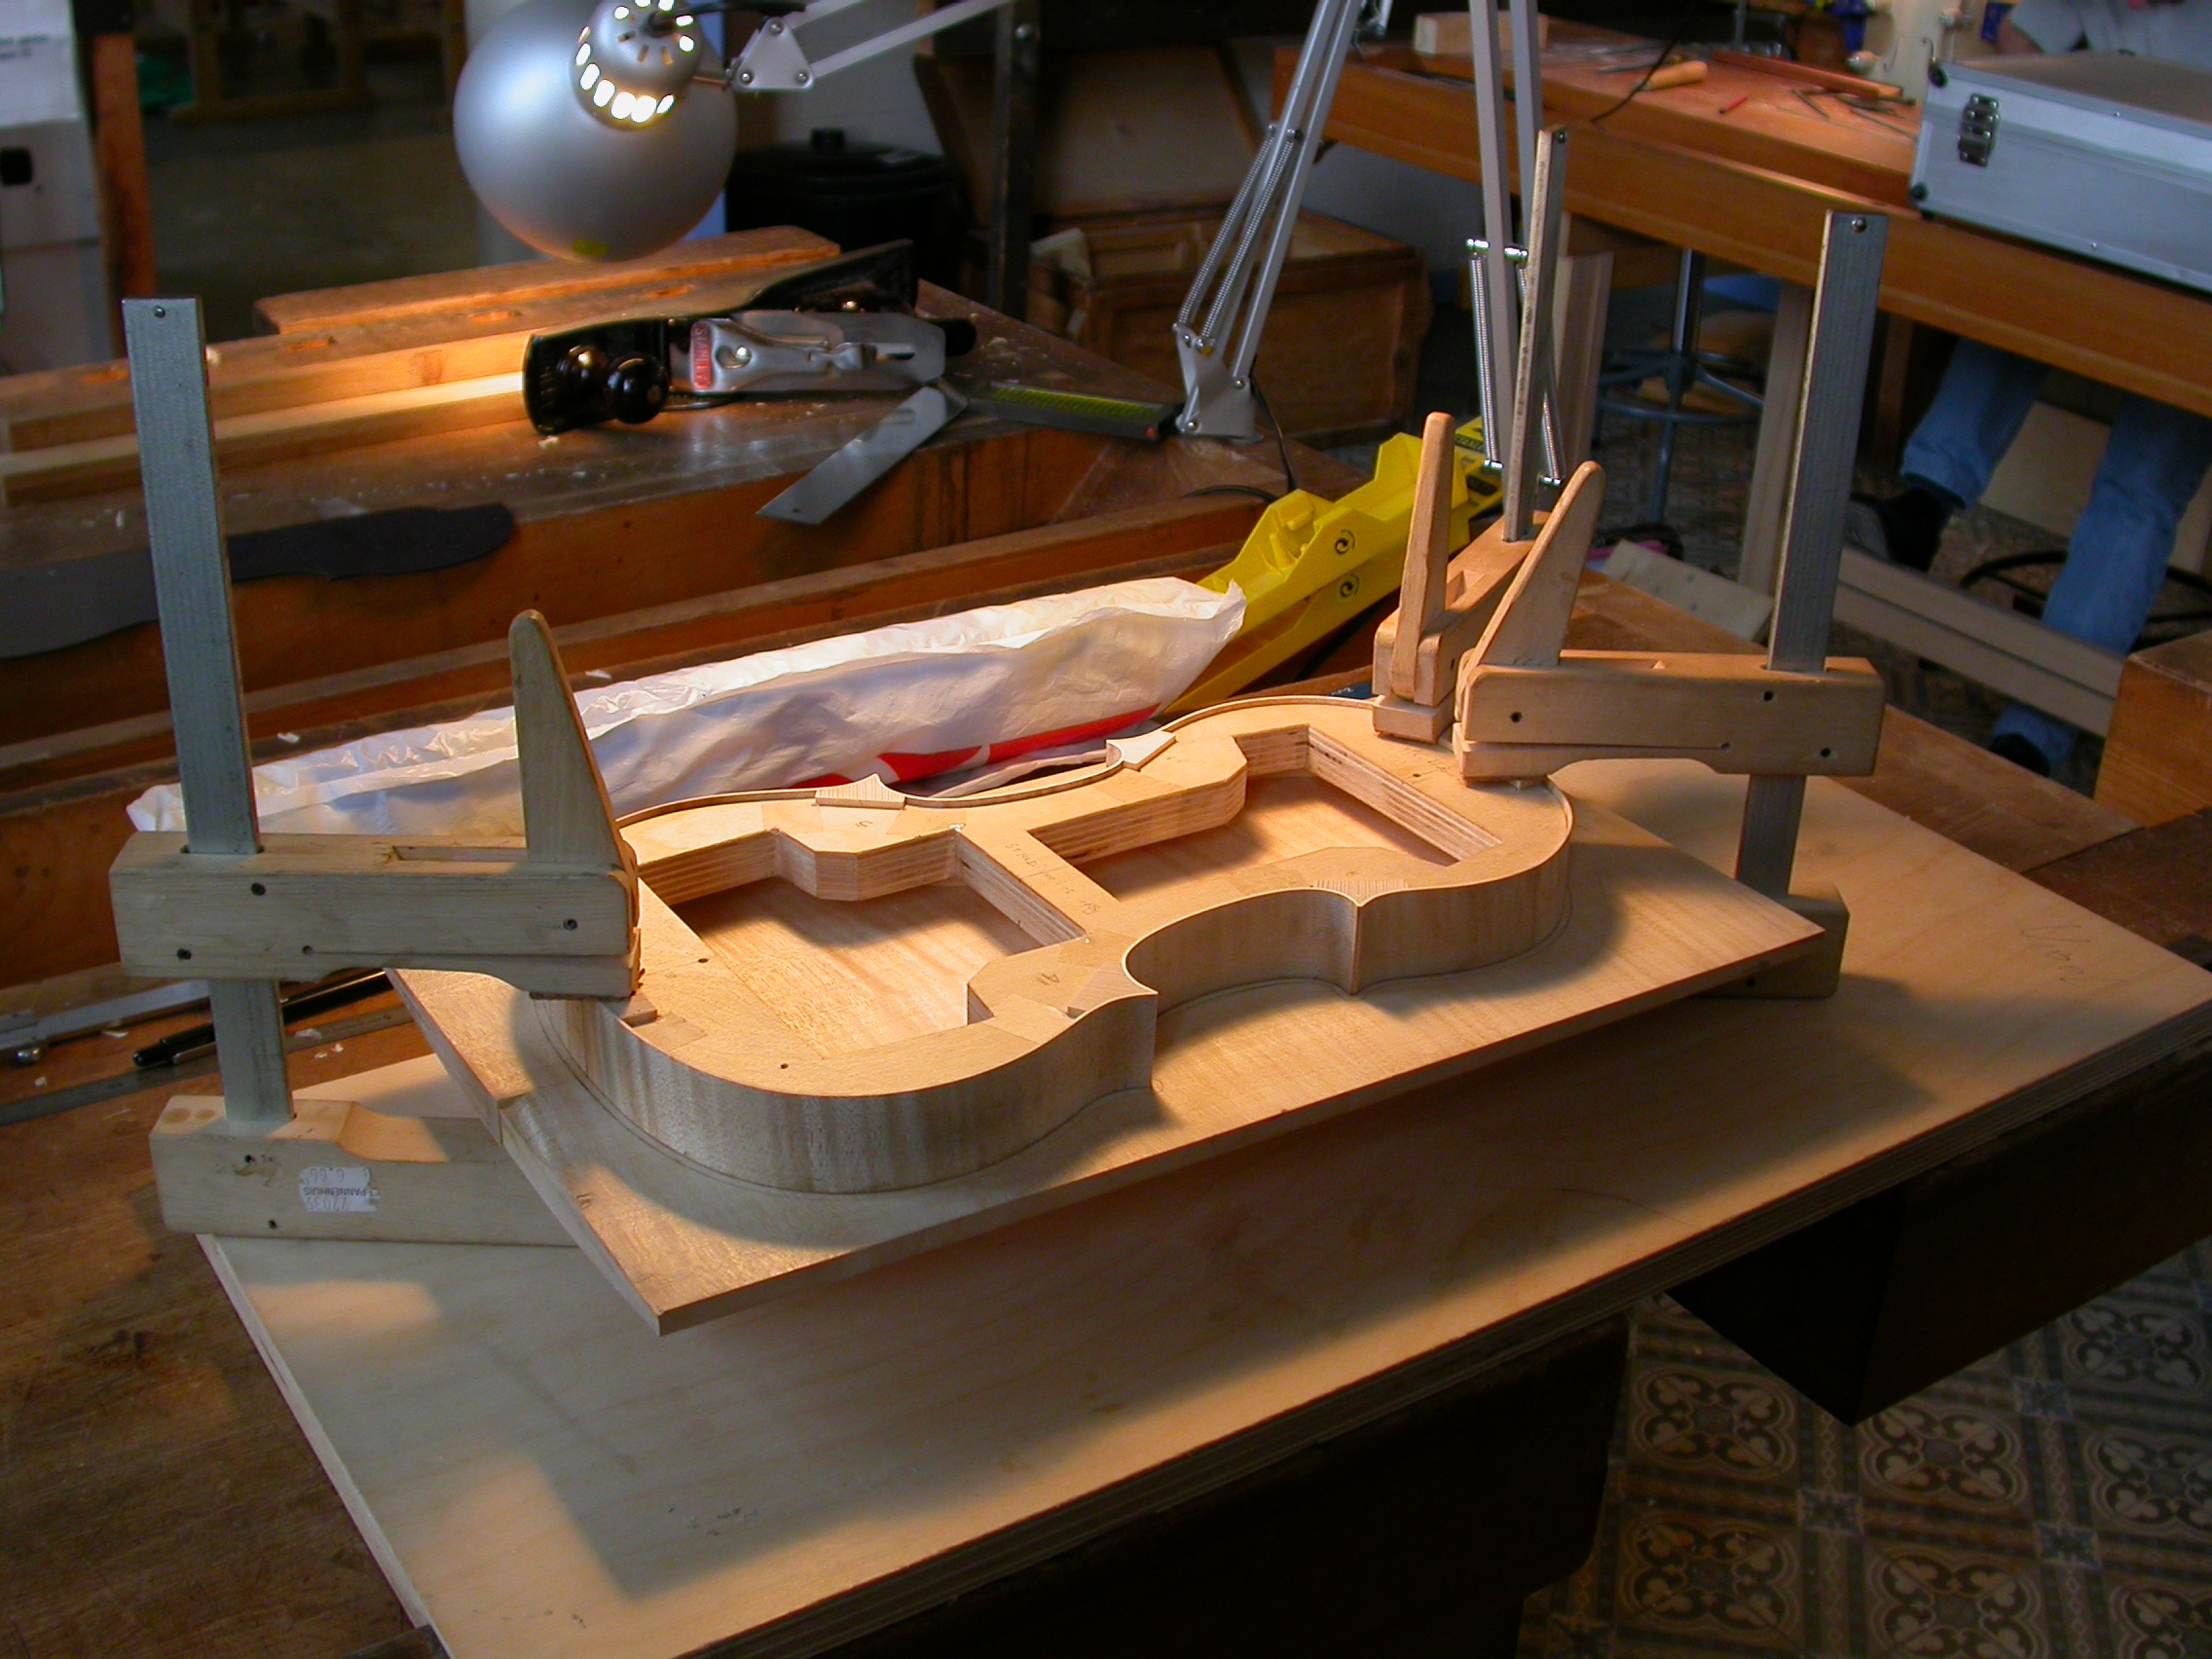  *After : photo : paul slab workbench wood carving violin case clamps